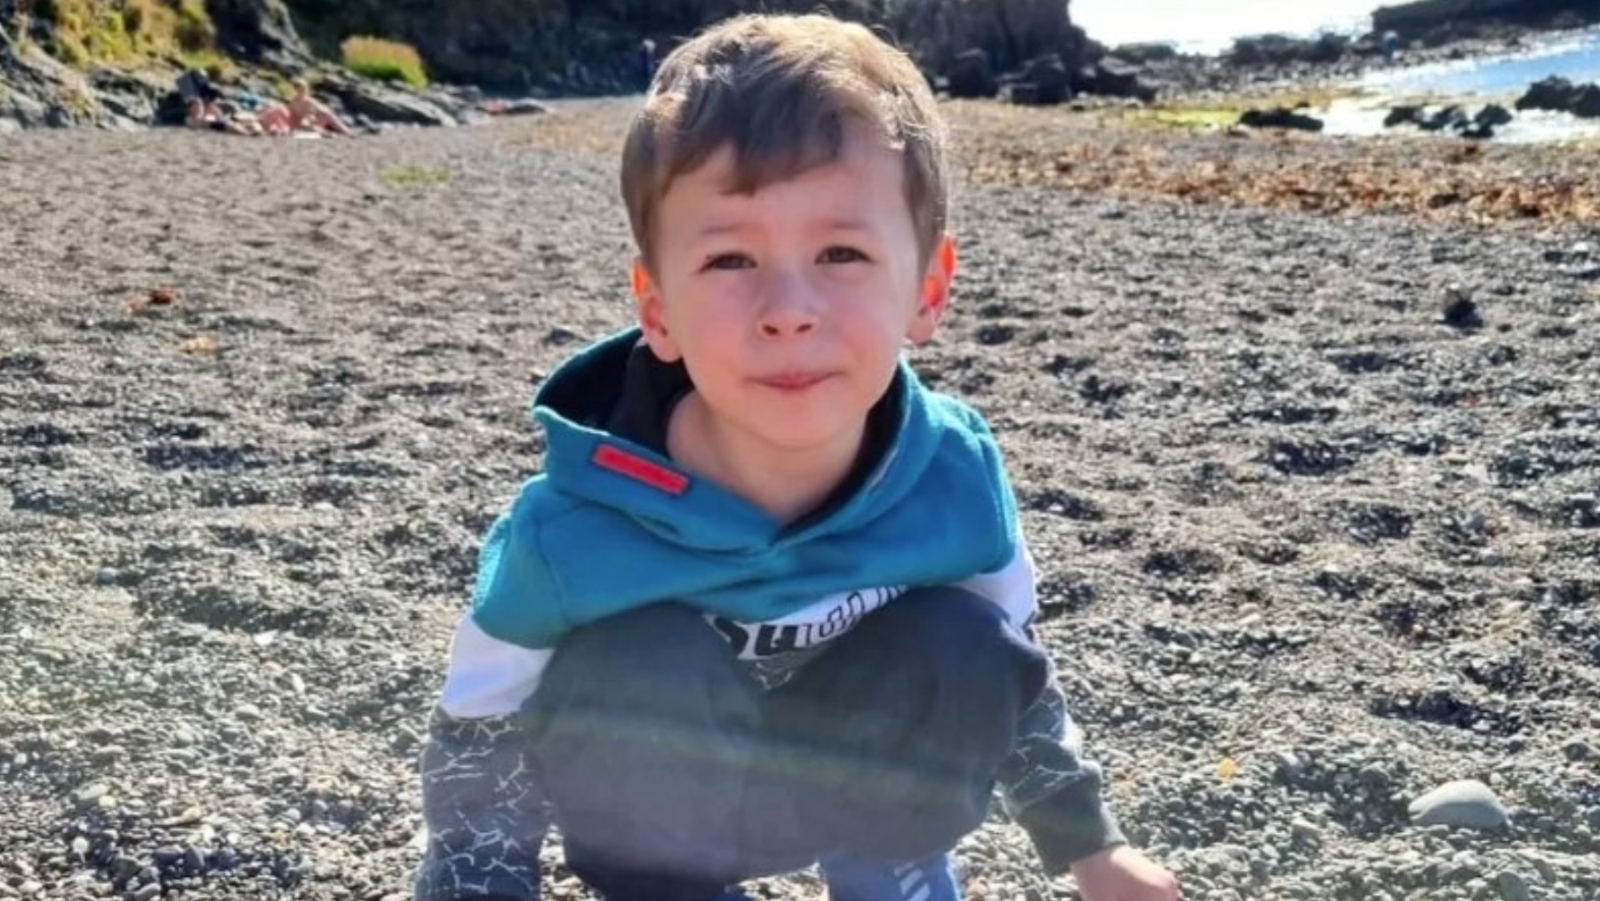 Three-year-old Aaron attended Firtrees Nursery in Motherwell where the incident occurred.